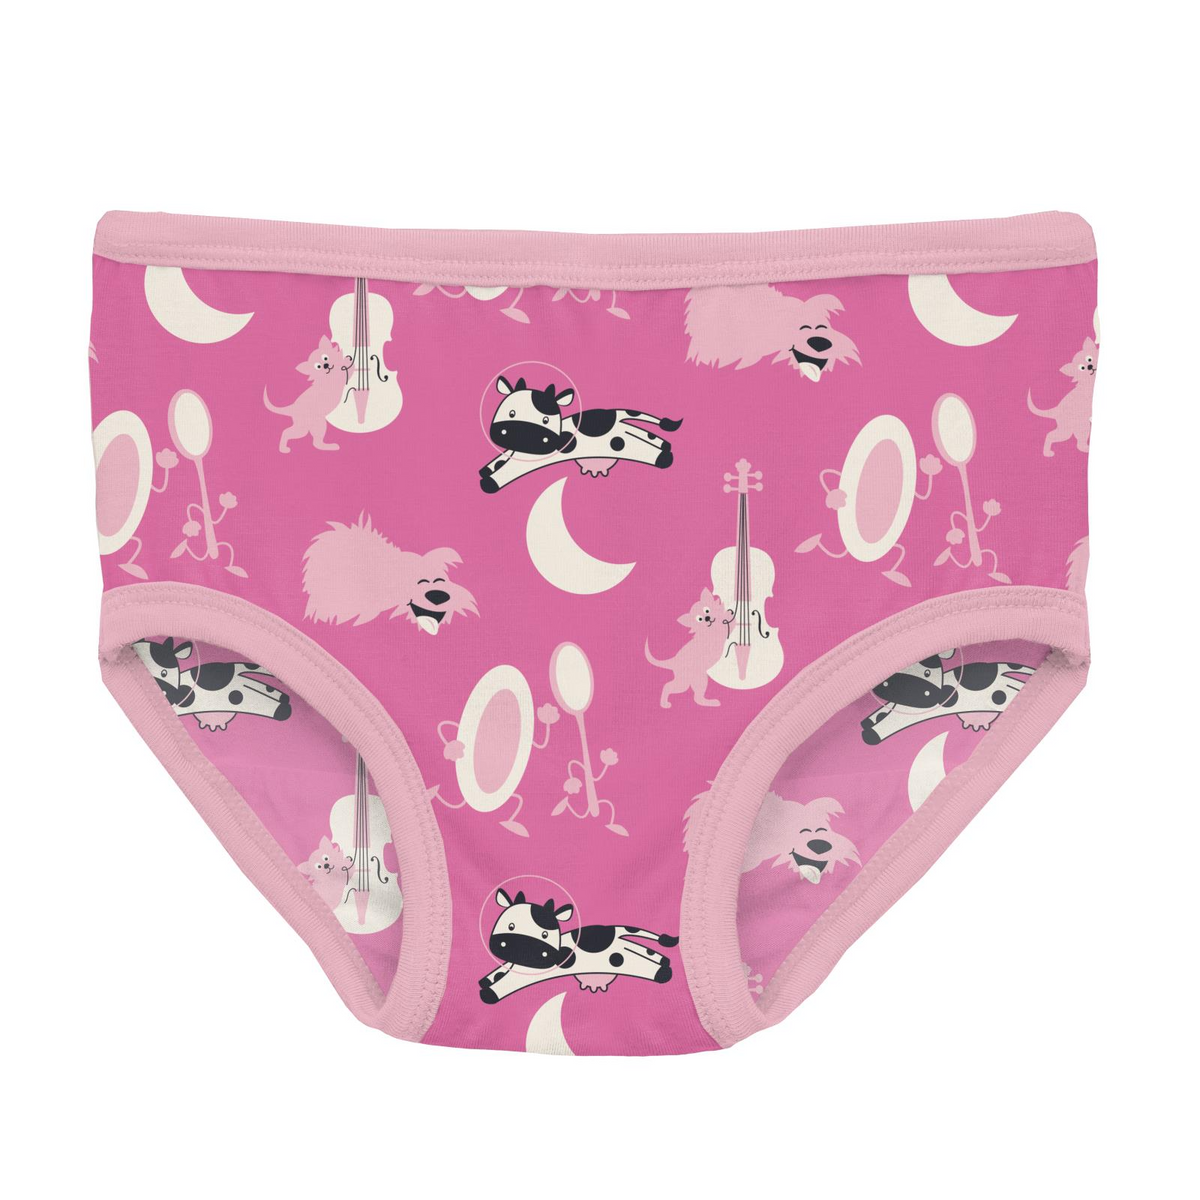 Kickee Pants Tulip Hey Diddle Diddle Print Girl's Underwear